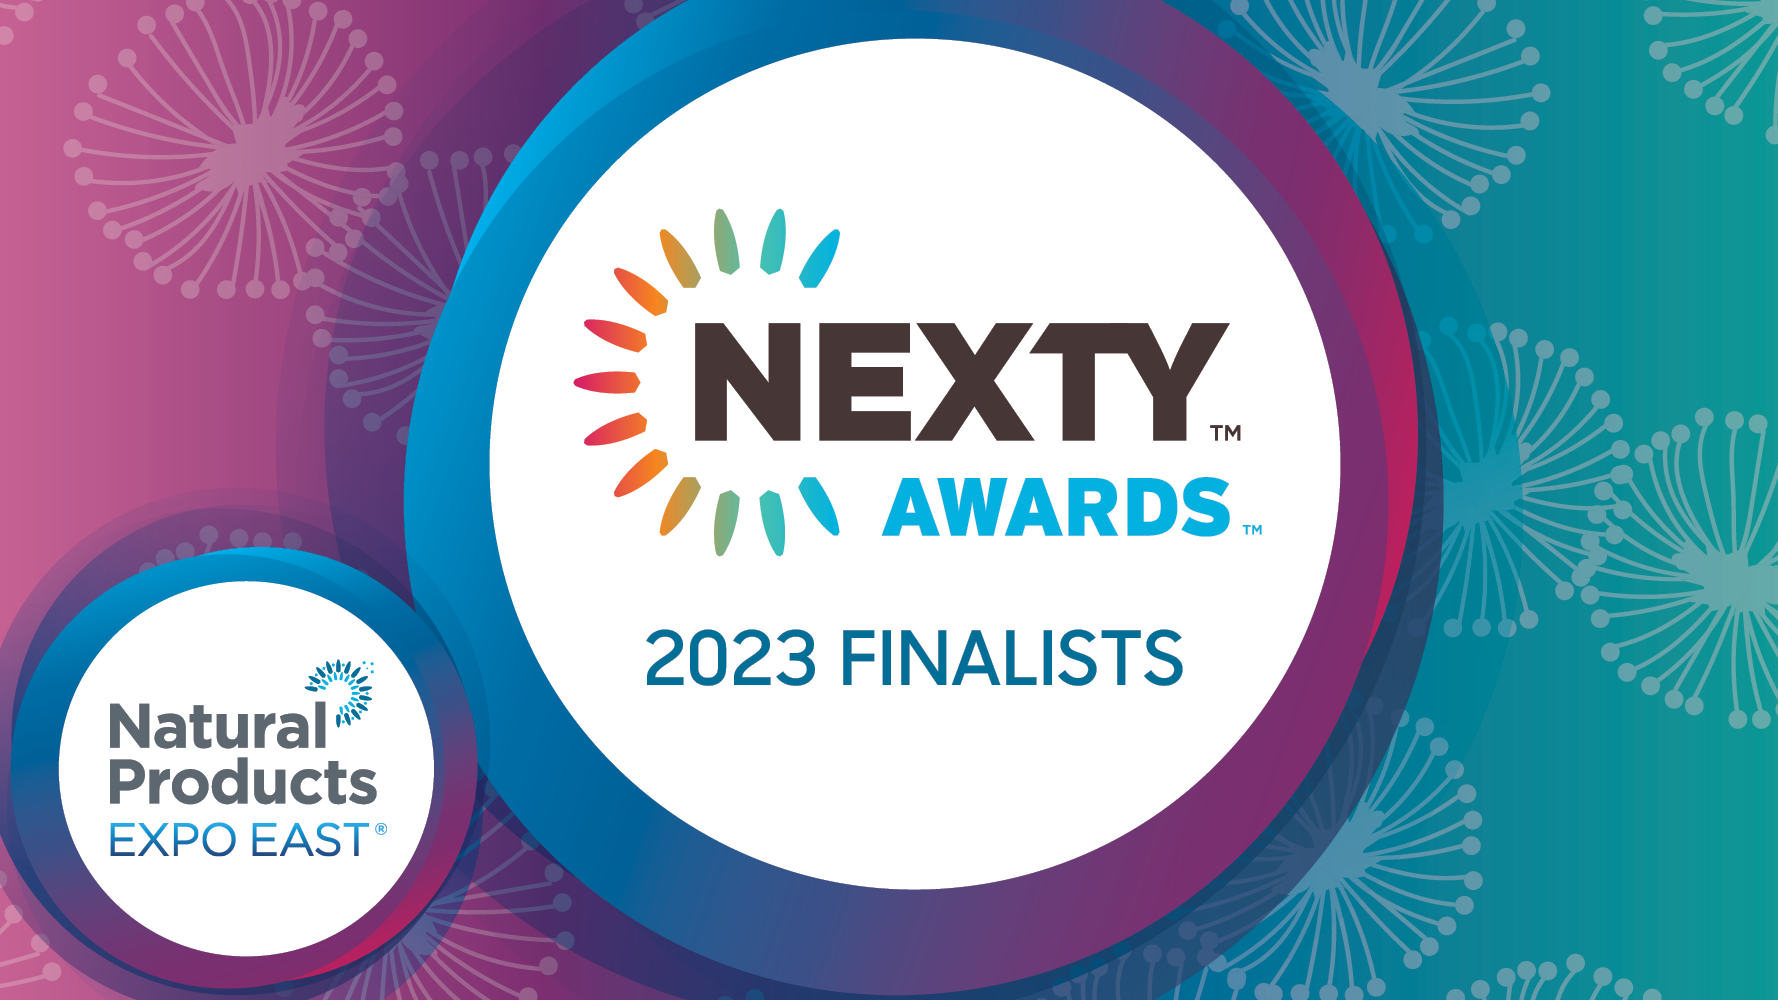 RIND REMIX Piña Colada named NEXTY finalist for Best New Sweet Snack